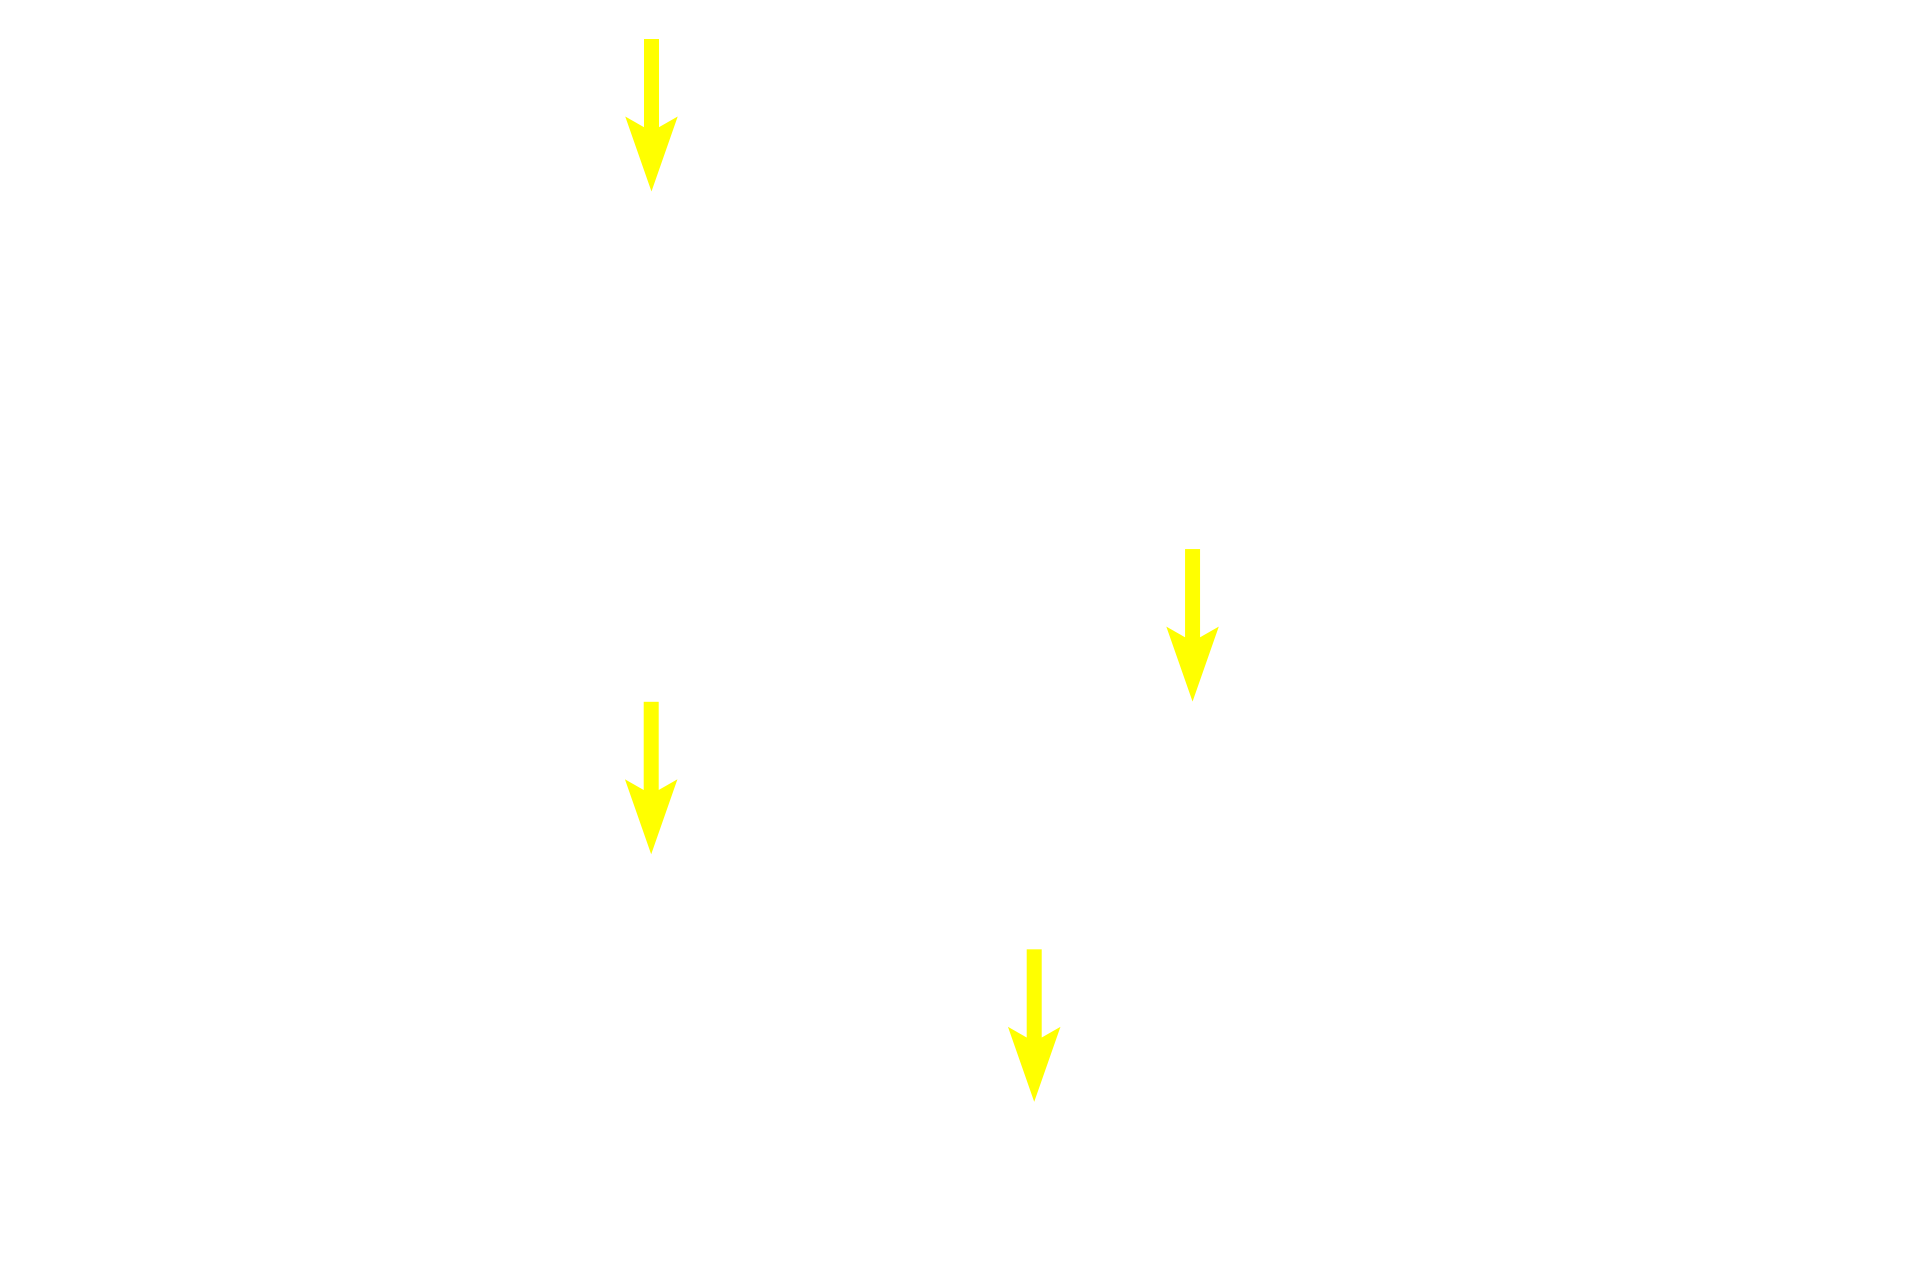 Spermatids (late) <p>Spermatogenesis has four phases: spermatocytogenesis (mitotic division of spermatogonia to primary spermatocytes); meiosis (a two-step division of primary spermatocytes to secondary spermatocytes to spermatids); spermiogenesis (cytodifferentiation of spermatids into mature spermatozoa); and spermiation (the release of sperm from Sertoli cells). 600X</p>
